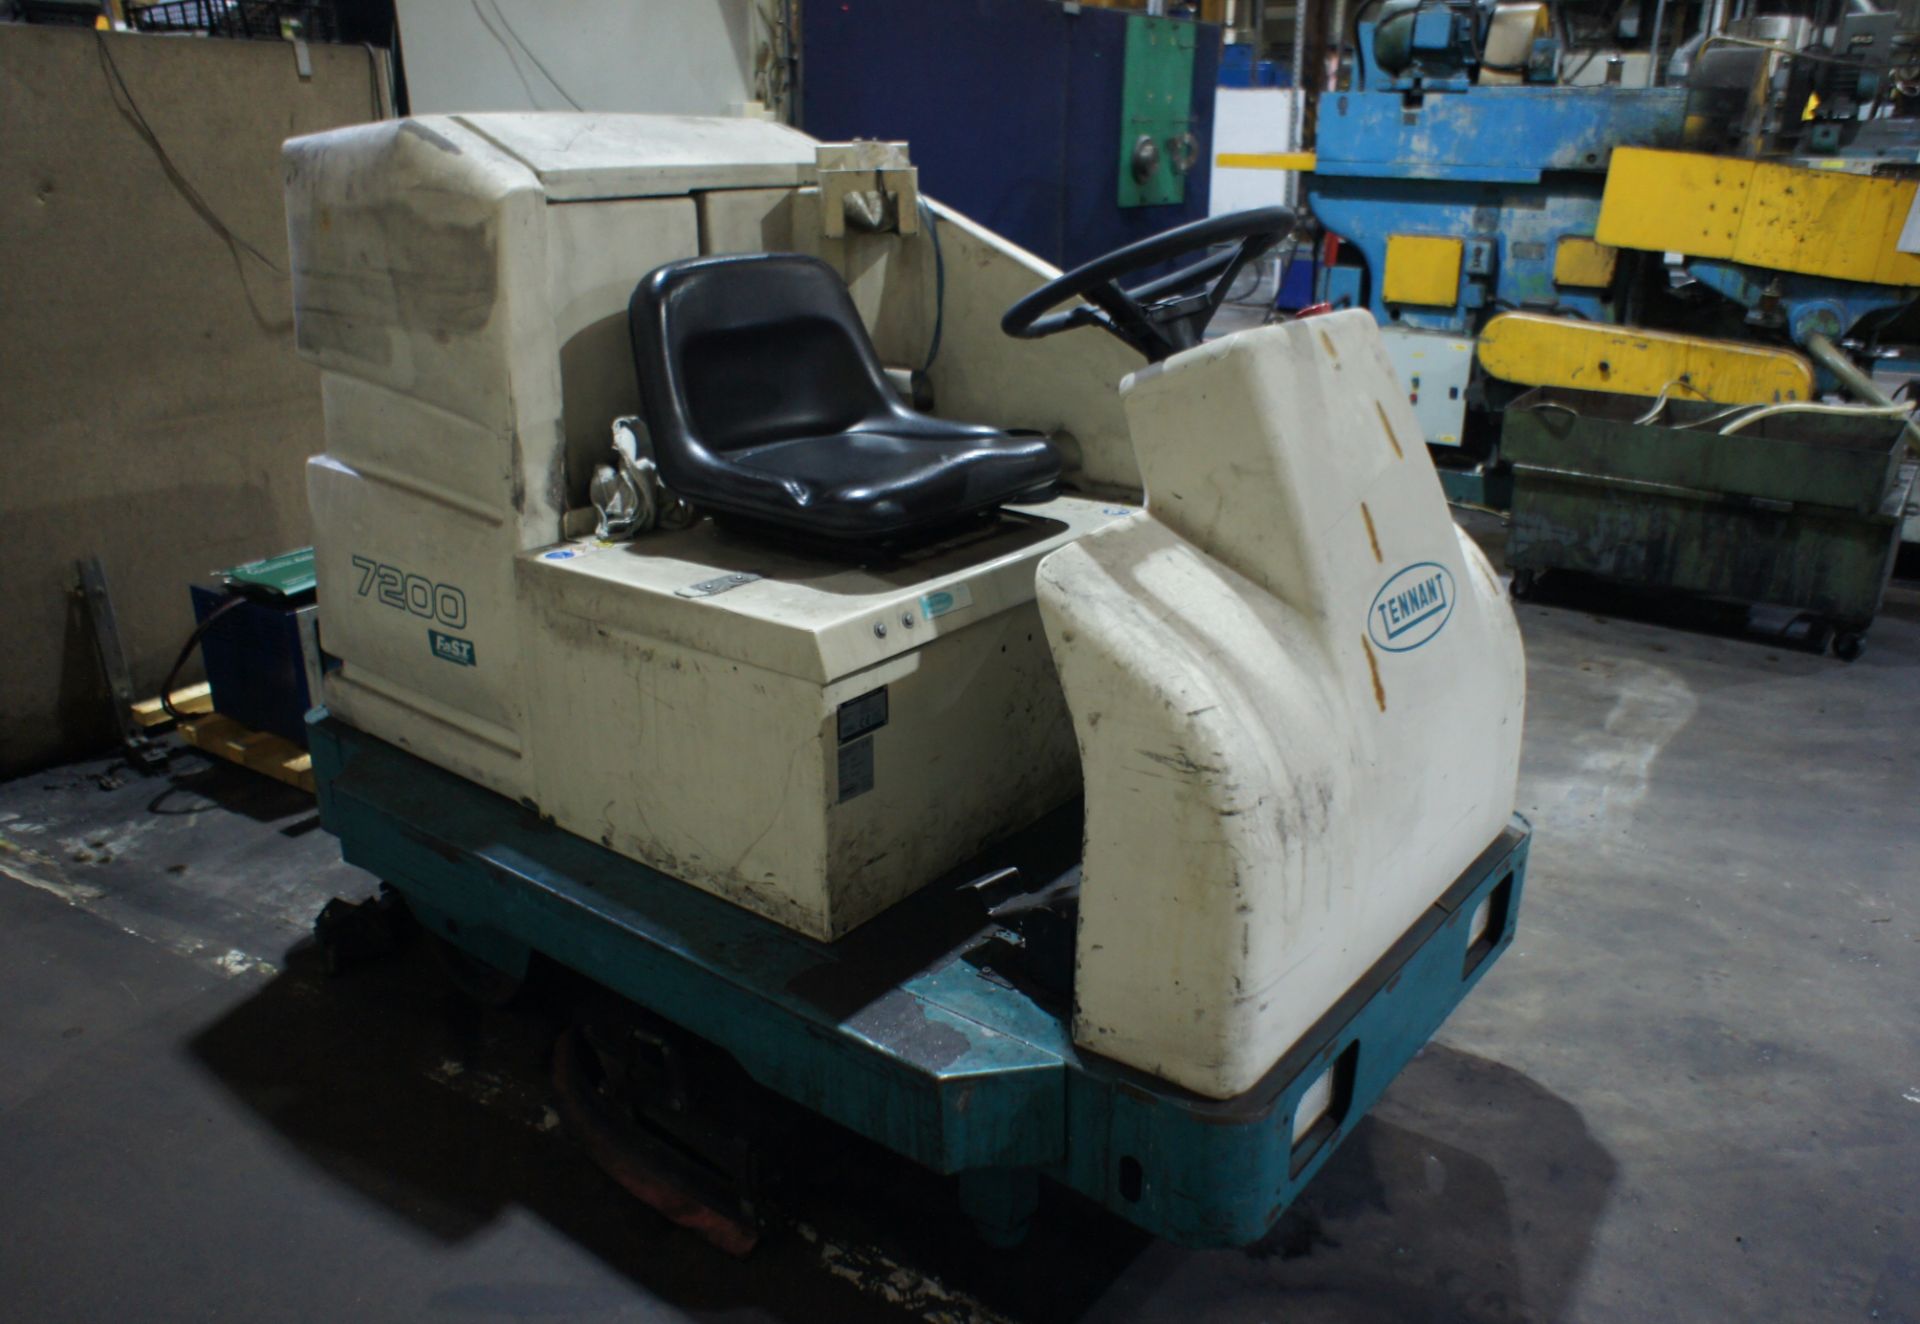 Tennant 7200 ride on scrubber dryer - Image 2 of 9